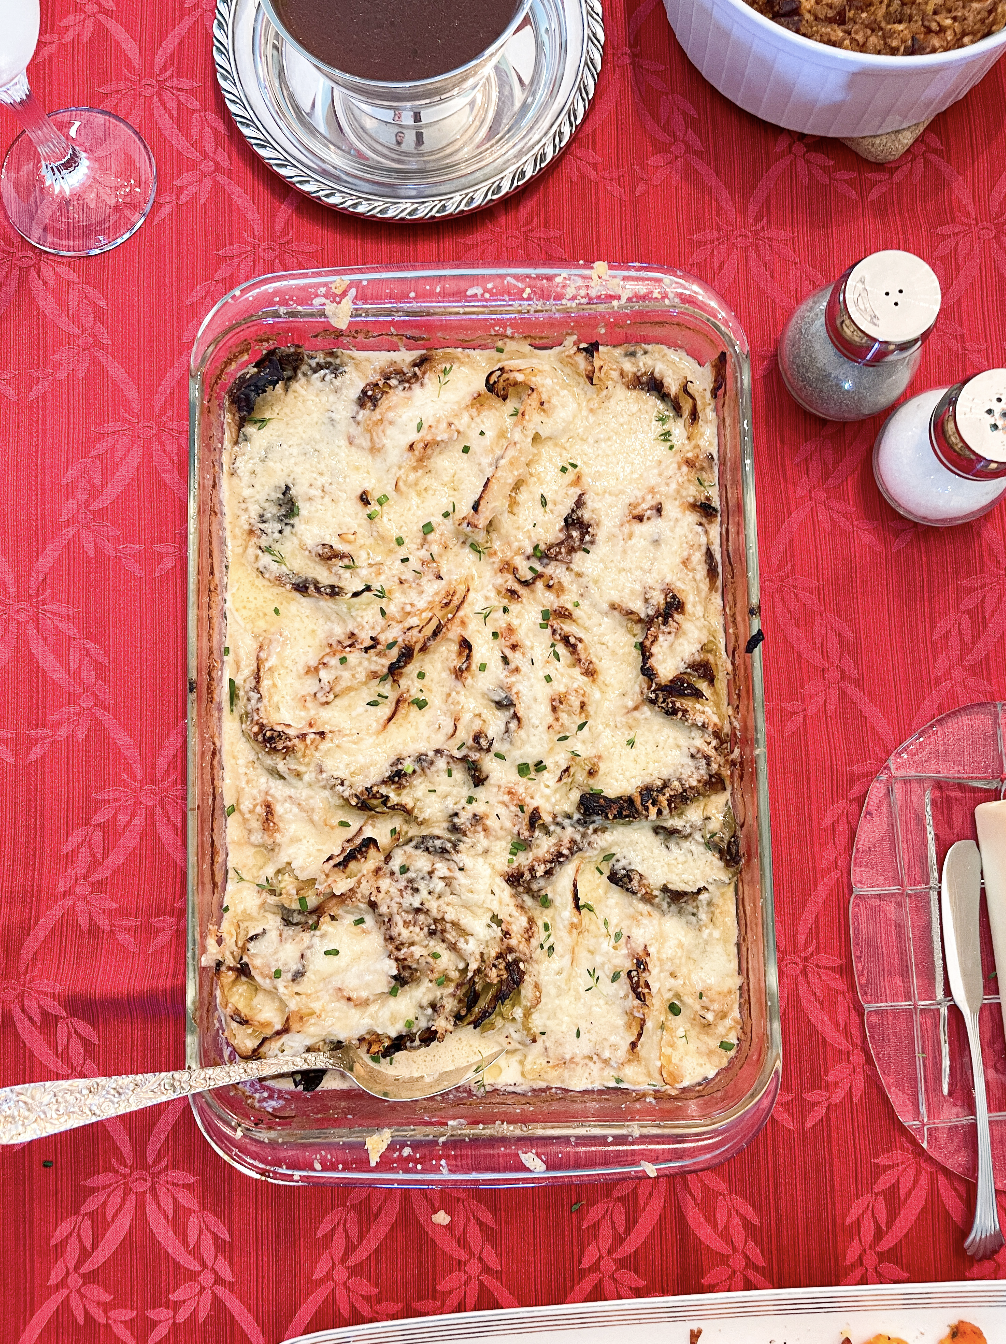 cabbage gratin on red tablecloth for holidays